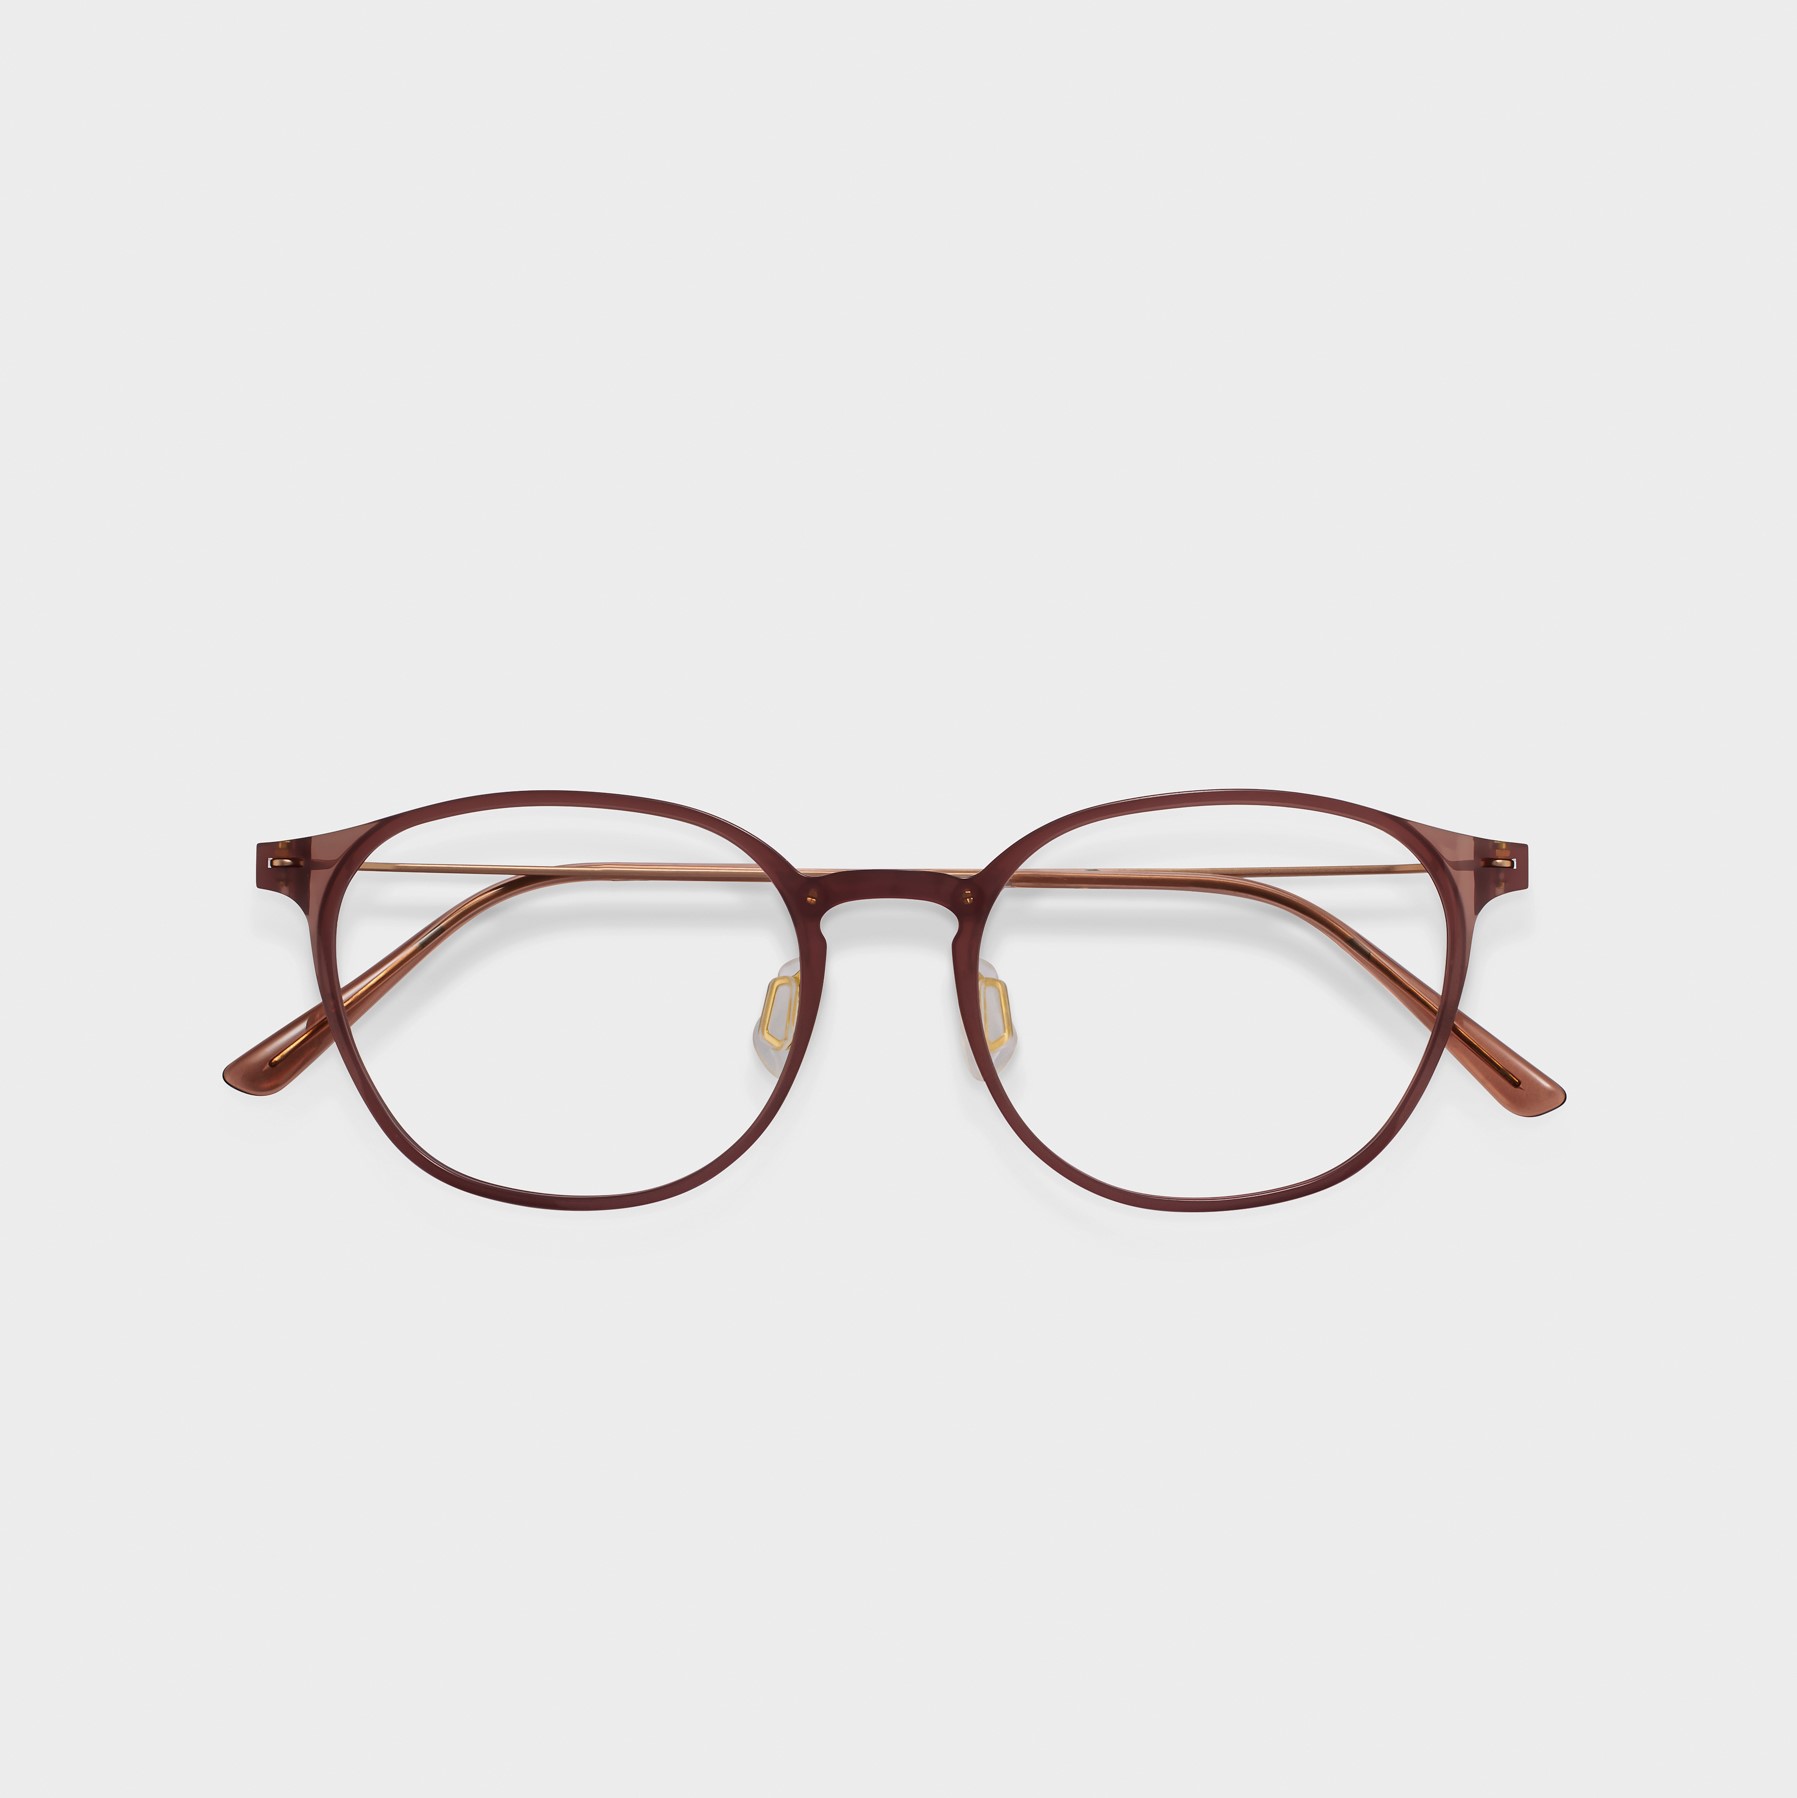 _CLROTTE_ Eyewear Glasses_ STAG